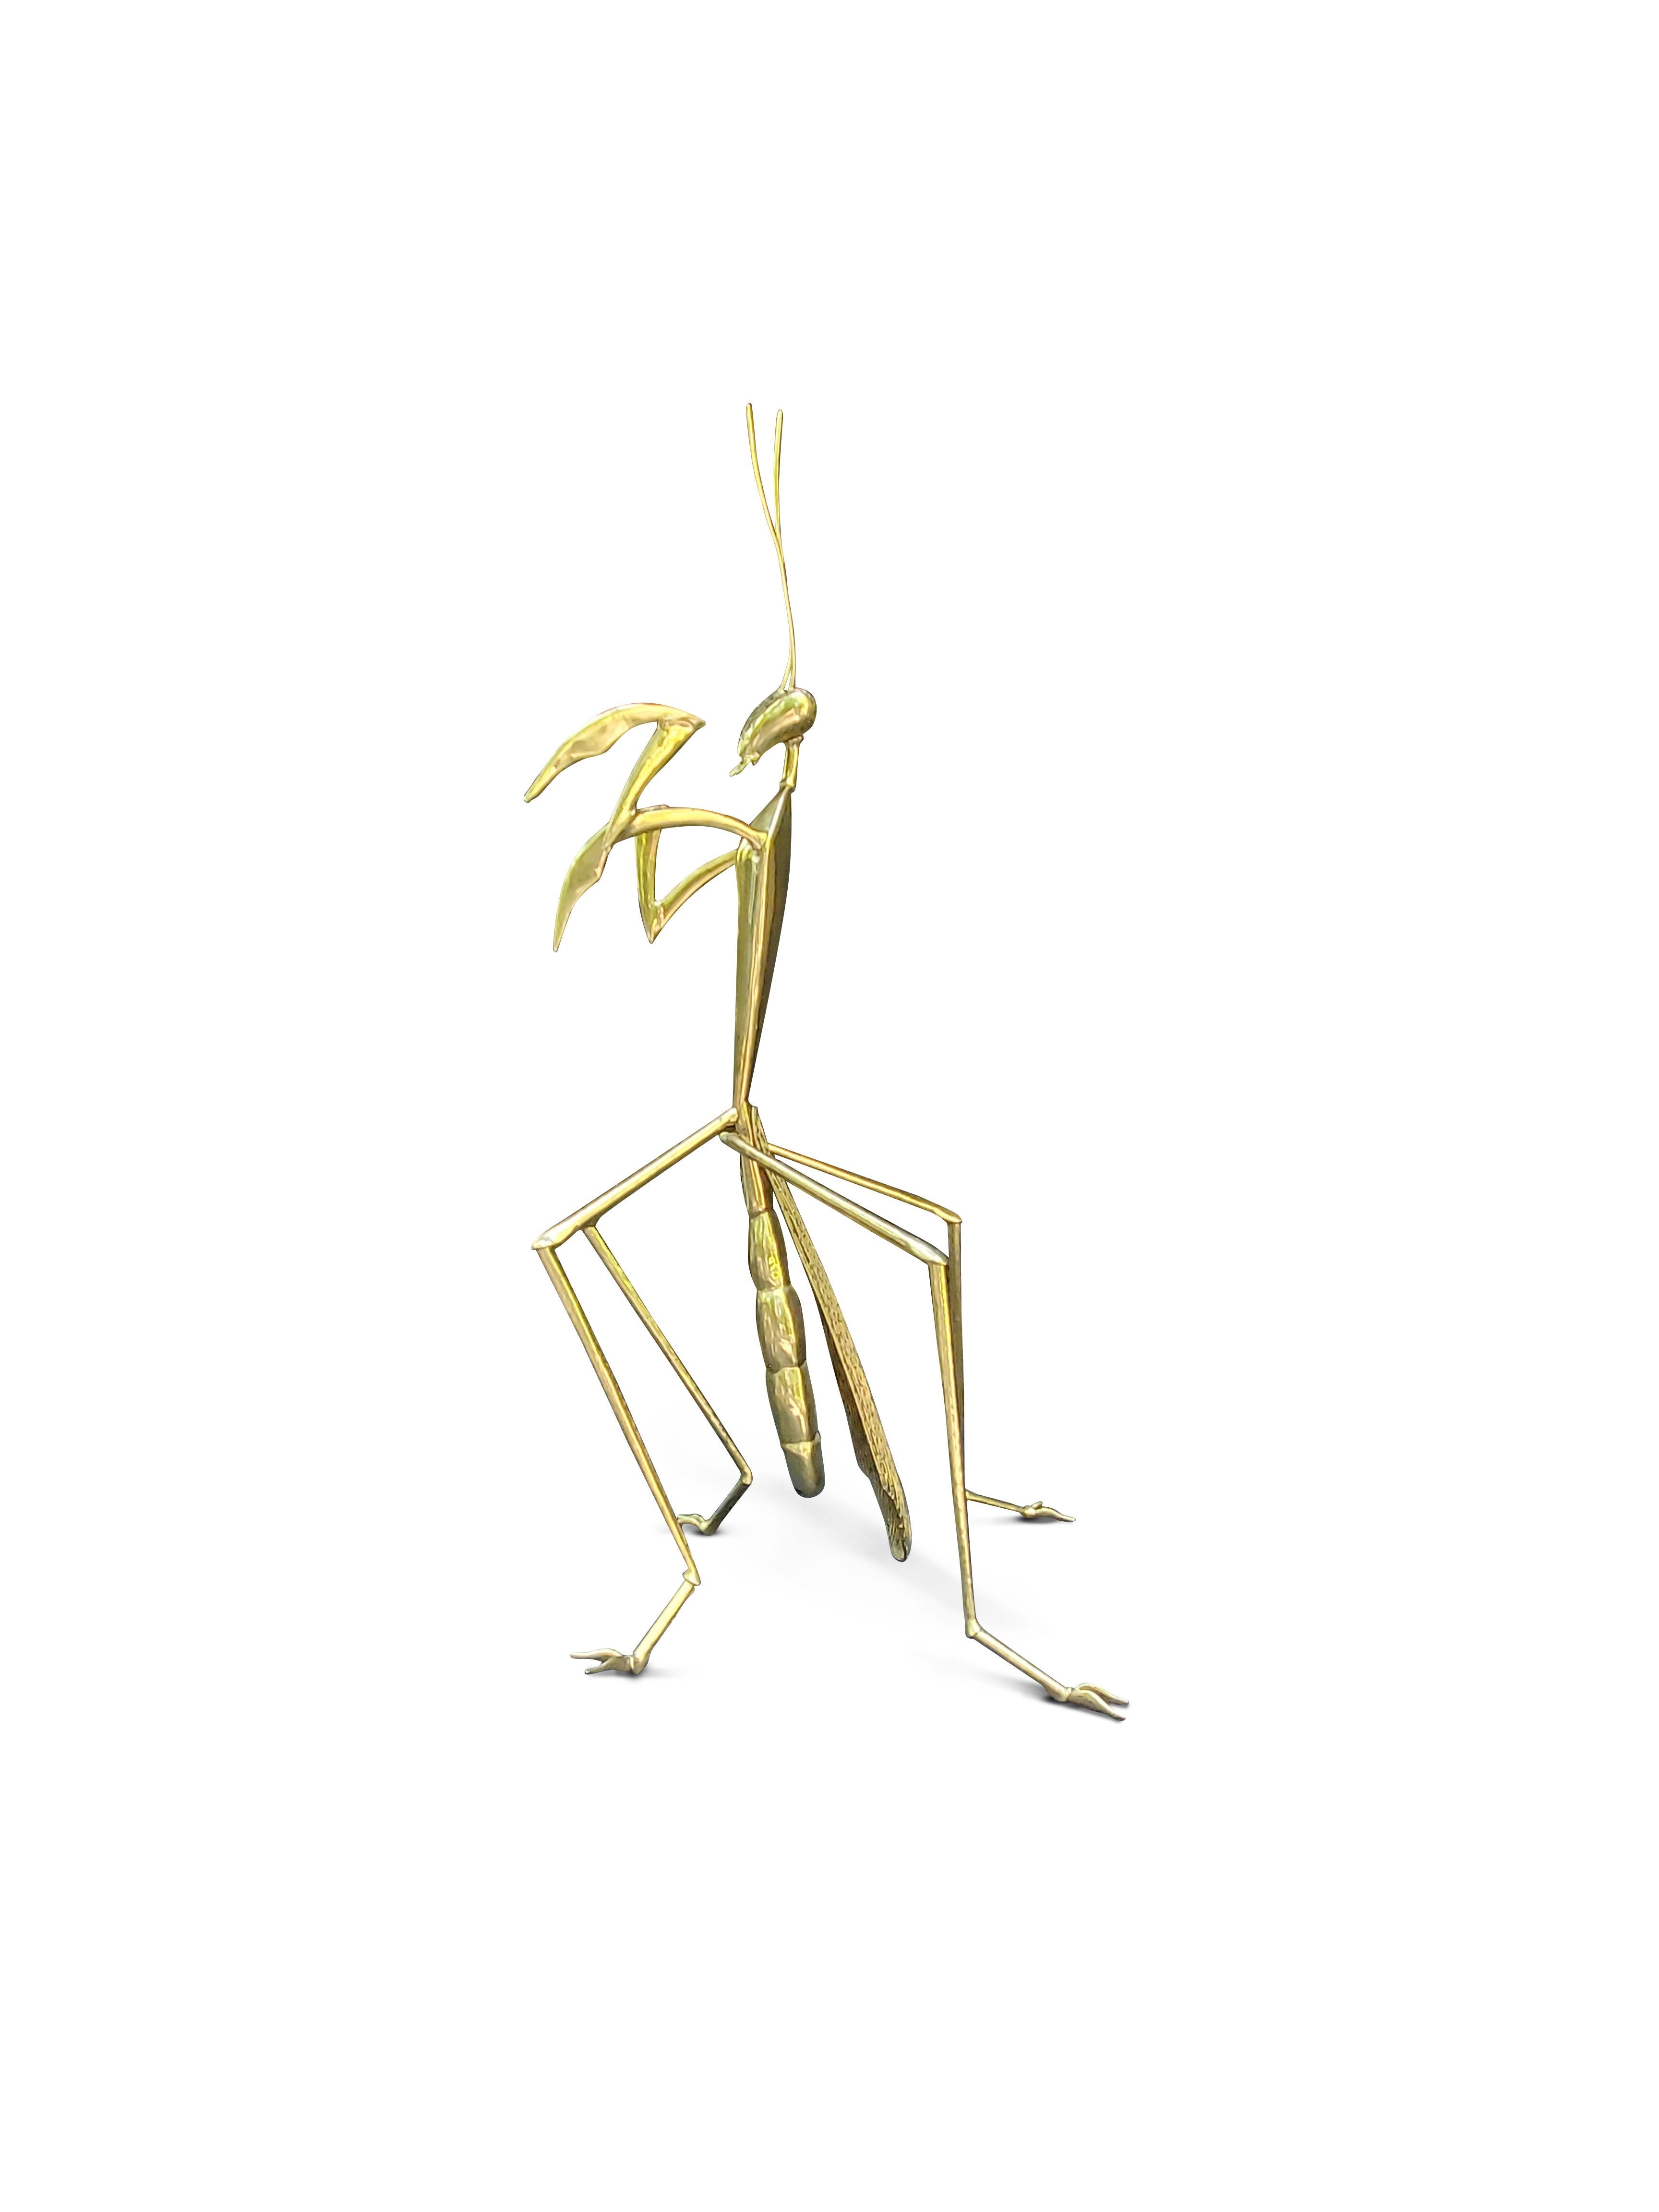 Large Italian 1970s Brass 'Praying Mantis' Floor Sculpture In Good Condition For Sale In Middlesex, NJ